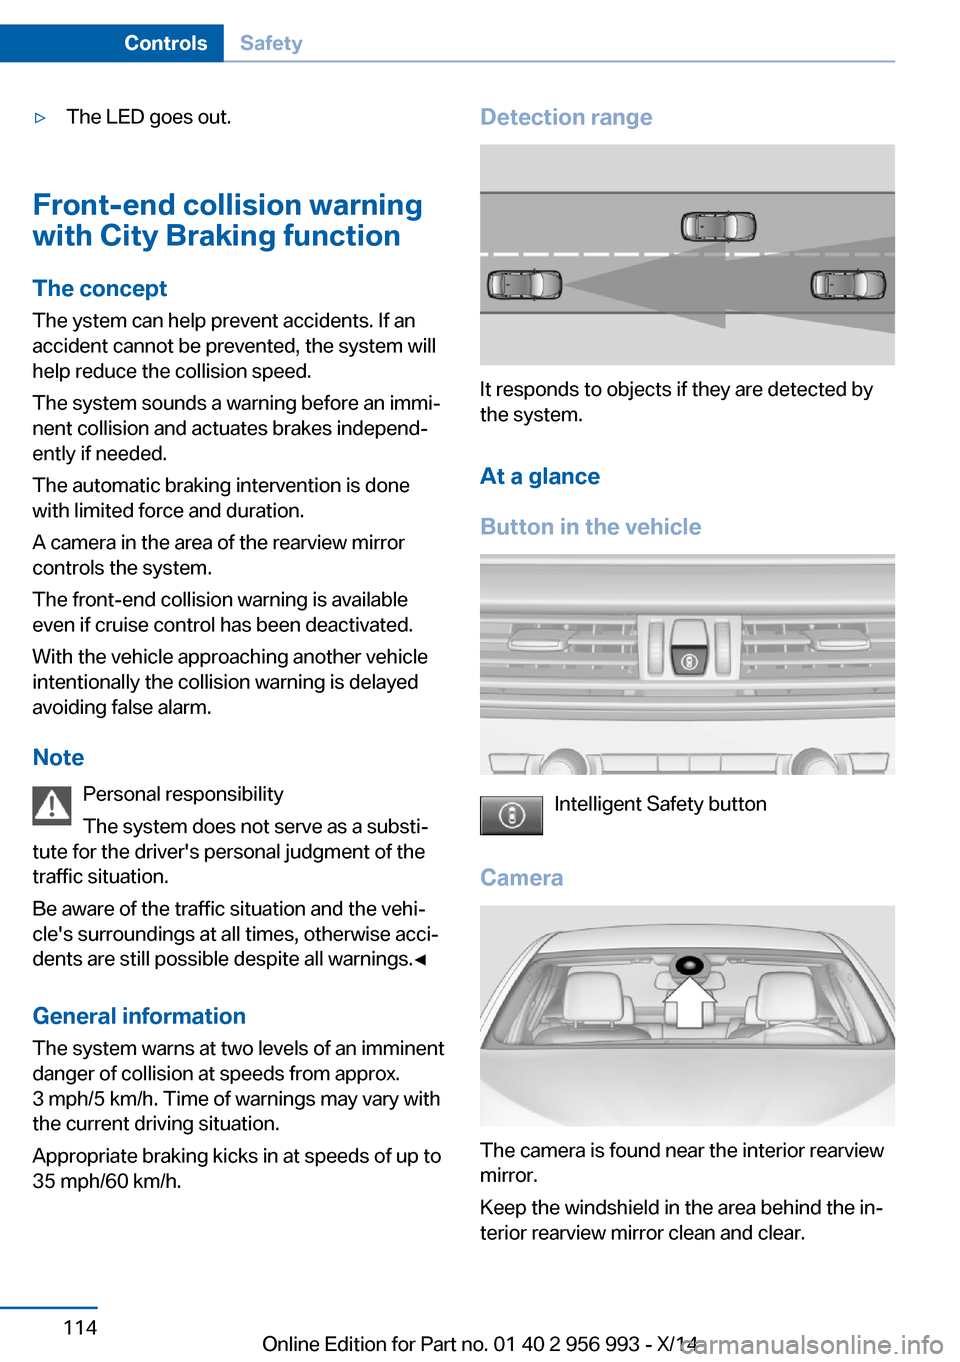 BMW X6M 2014 F86 Owners Guide ▷The LED goes out.
Front-end collision warning
with City Braking function
The concept The ystem can help prevent accidents. If an
accident cannot be prevented, the system will
help reduce the collis